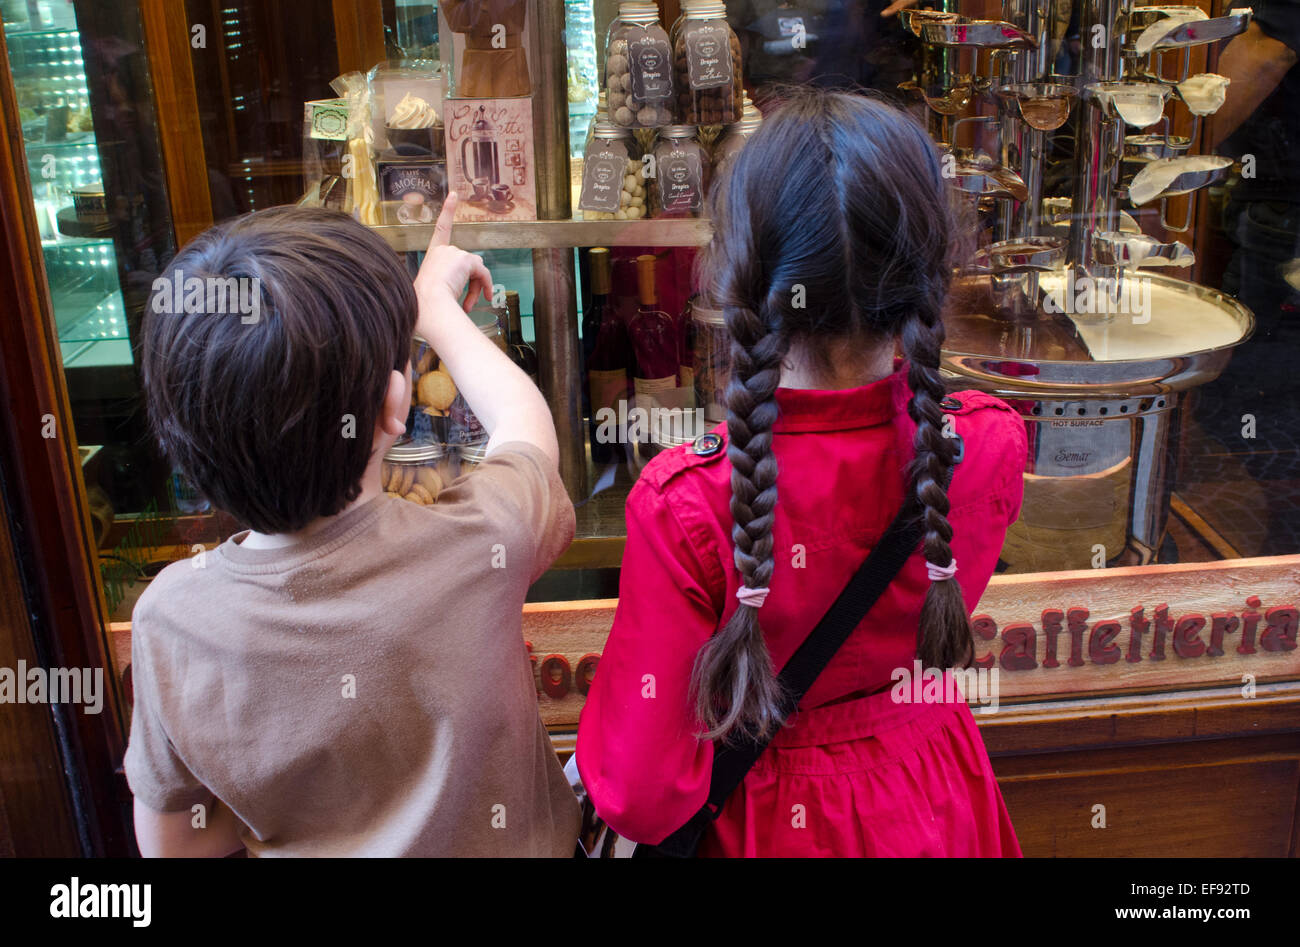 Two young children looking at confectionary in the window display of a cafe in Lucca, Tuscany, Italy Stock Photo